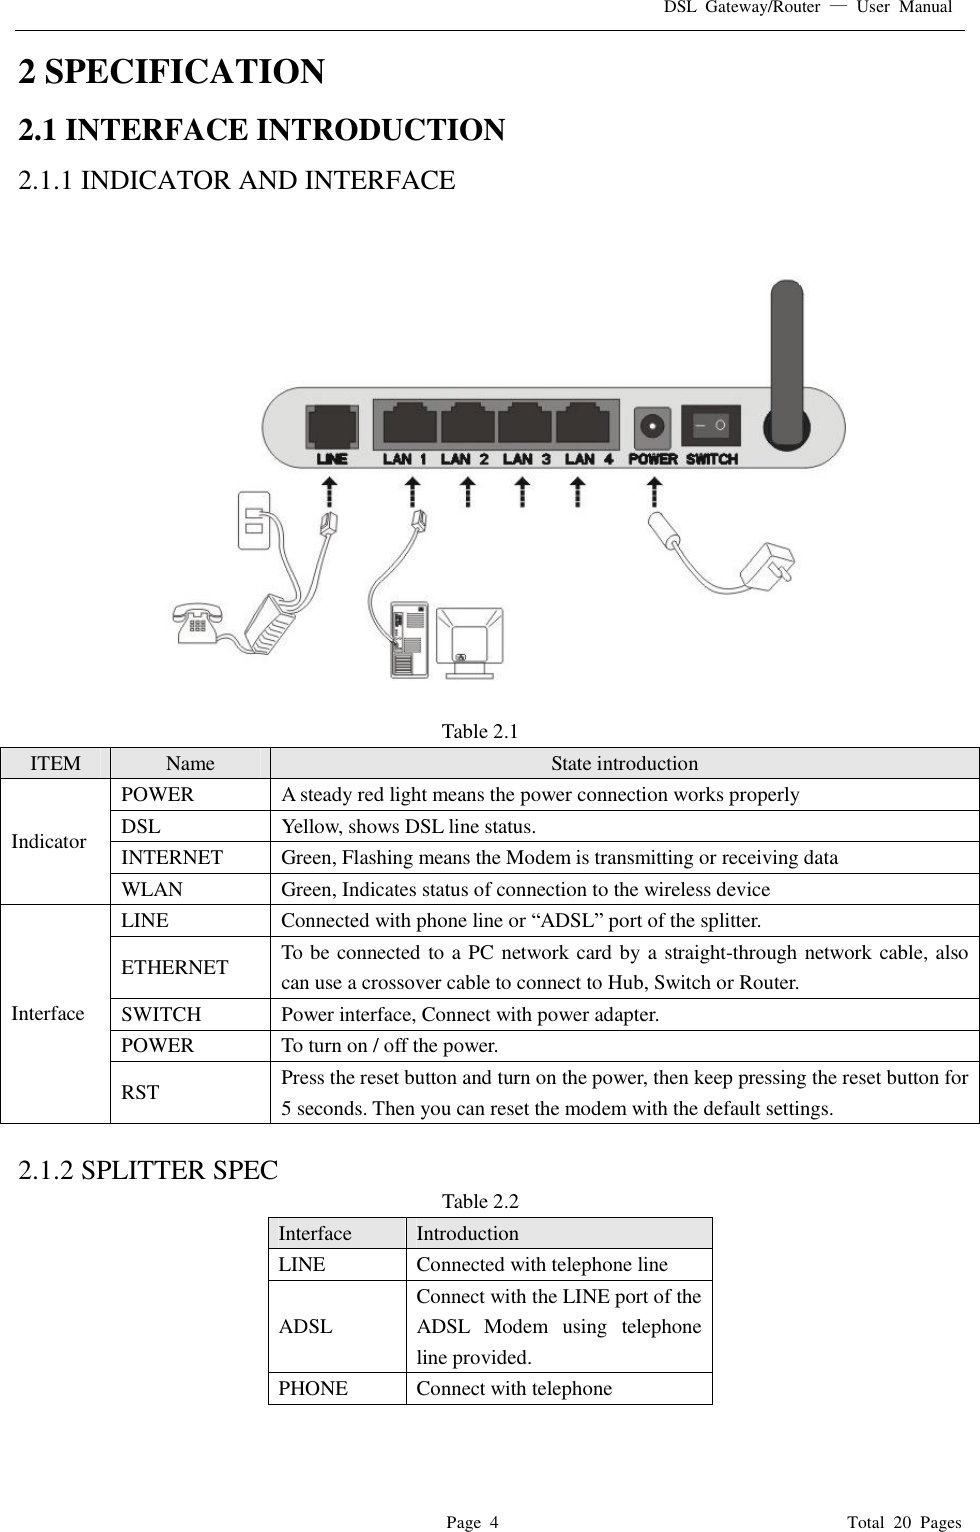 DSL Gateway/Router  — User Manual  Page 4                                       Total 20 Pages 2 SPECIFICATION 2.1 INTERFACE INTRODUCTION 2.1.1 INDICATOR AND INTERFACE   Table 2.1 ITEM  Name  State introduction POWER  A steady red light means the power connection works properly DSL  Yellow, shows DSL line status. INTERNET  Green, Flashing means the Modem is transmitting or receiving data Indicator WLAN  Green, Indicates status of connection to the wireless device LINE  Connected with phone line or “ADSL” port of the splitter.  ETHERNET  To be connected to a PC network card by a straight-through network cable, also can use a crossover cable to connect to Hub, Switch or Router. SWITCH  Power interface, Connect with power adapter. POWER  To turn on / off the power. Interface RST  Press the reset button and turn on the power, then keep pressing the reset button for 5 seconds. Then you can reset the modem with the default settings.  2.1.2 SPLITTER SPEC Table 2.2 Interface   Introduction LINE  Connected with telephone line  ADSL Connect with the LINE port of the ADSL Modem using telephone line provided. PHONE  Connect with telephone  